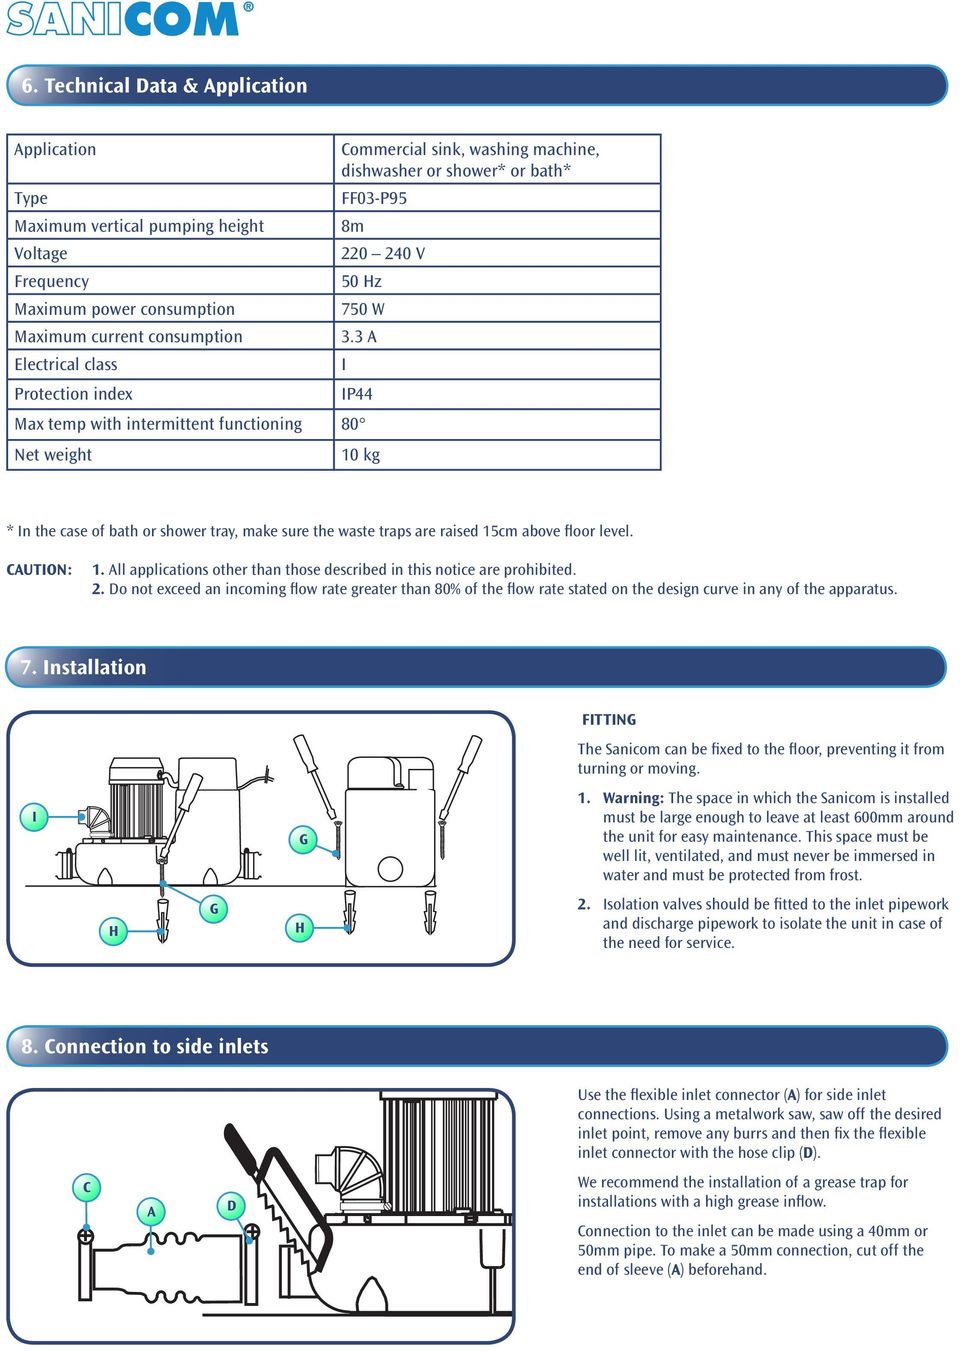 3 A I IP44 Max temp with intermittent functioning 80 Net weight 10 kg * In the case of bath or shower tray, make sure the waste traps are raised 15cm above floor level. CAUTION: 1.